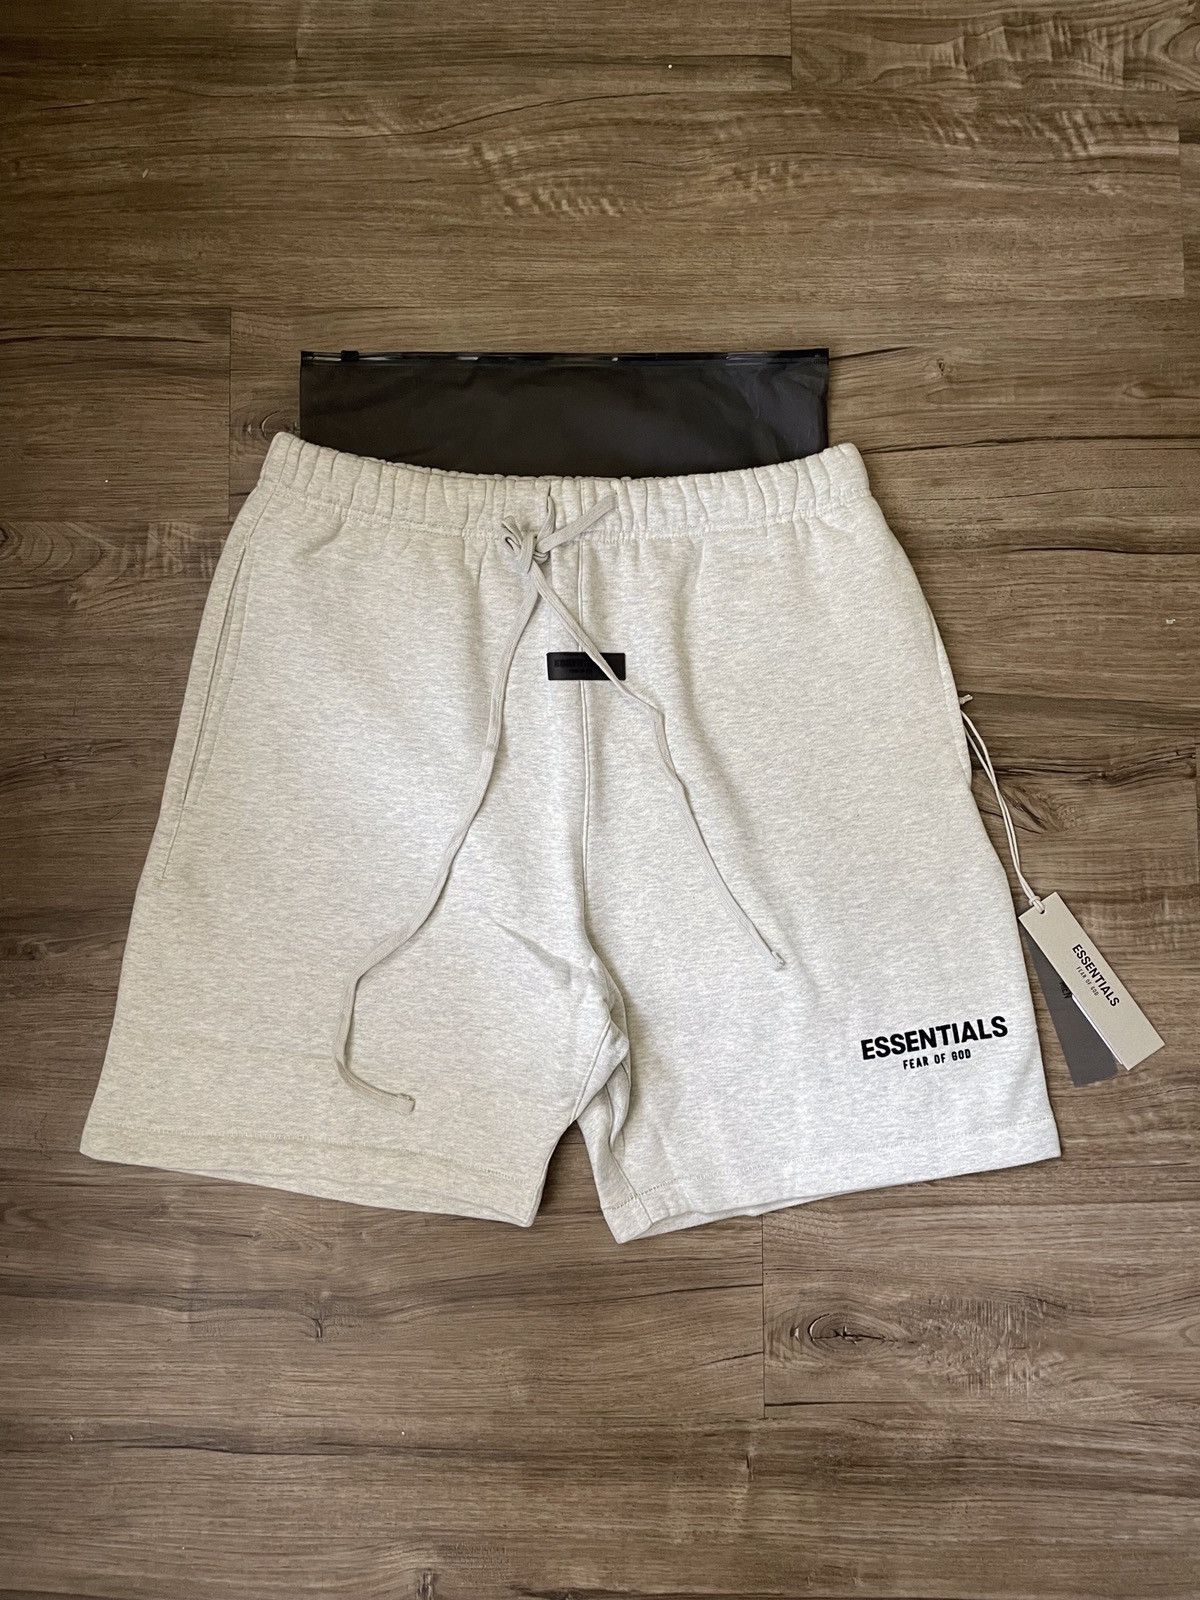 Nike FEAR OF GOD x Nike Reversible Shorts - size Small | Grailed